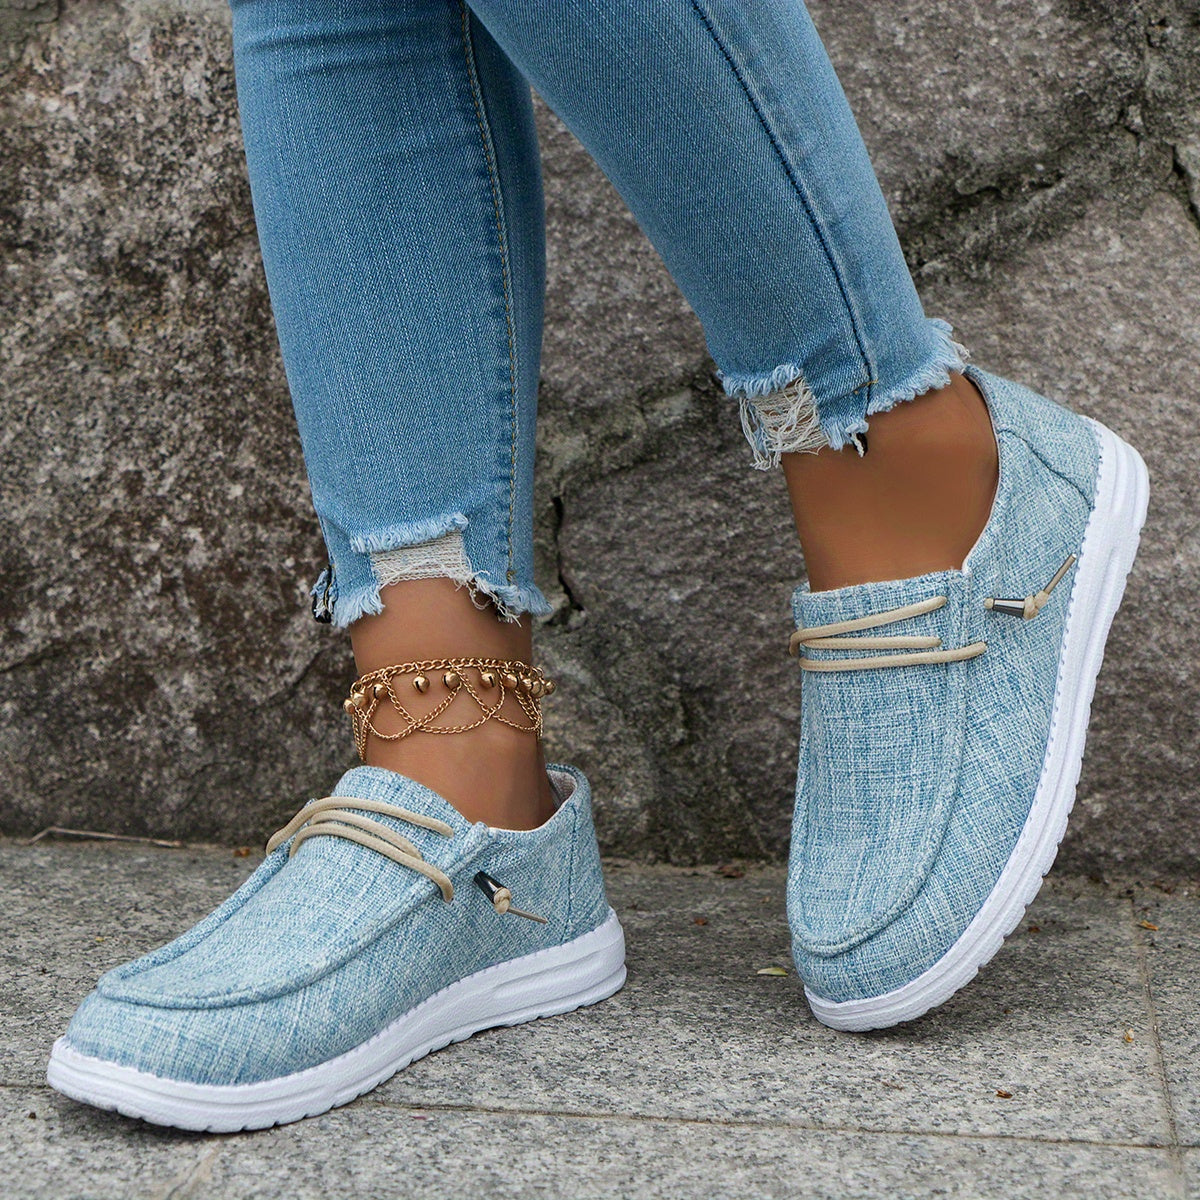 Women's Solid Color Canvas Shoes, Casual Lace Up Flat Sneakers, Women's Daily Travel Shoes